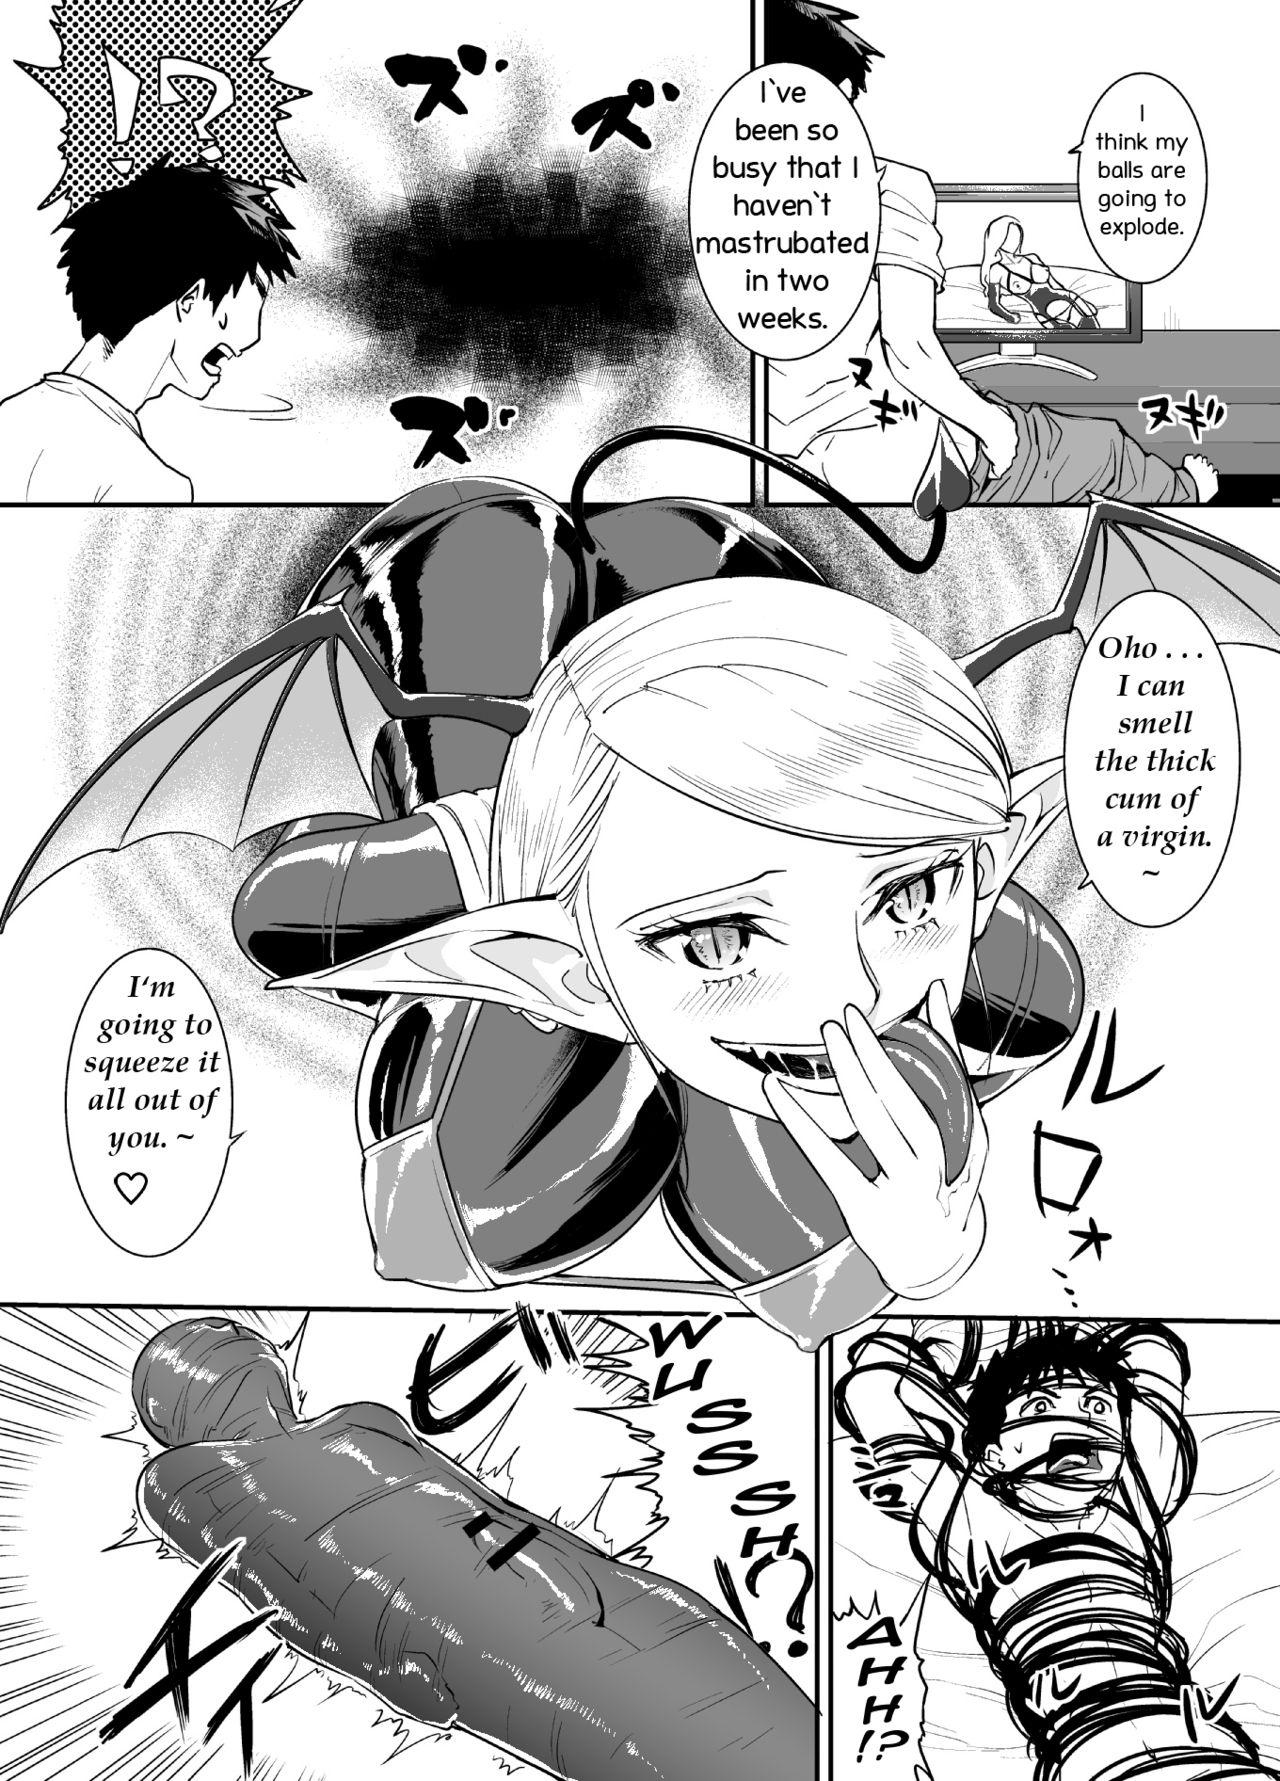 Hung ラバー・サキュバス - Rubber Succubus Gay Shorthair - Page 2